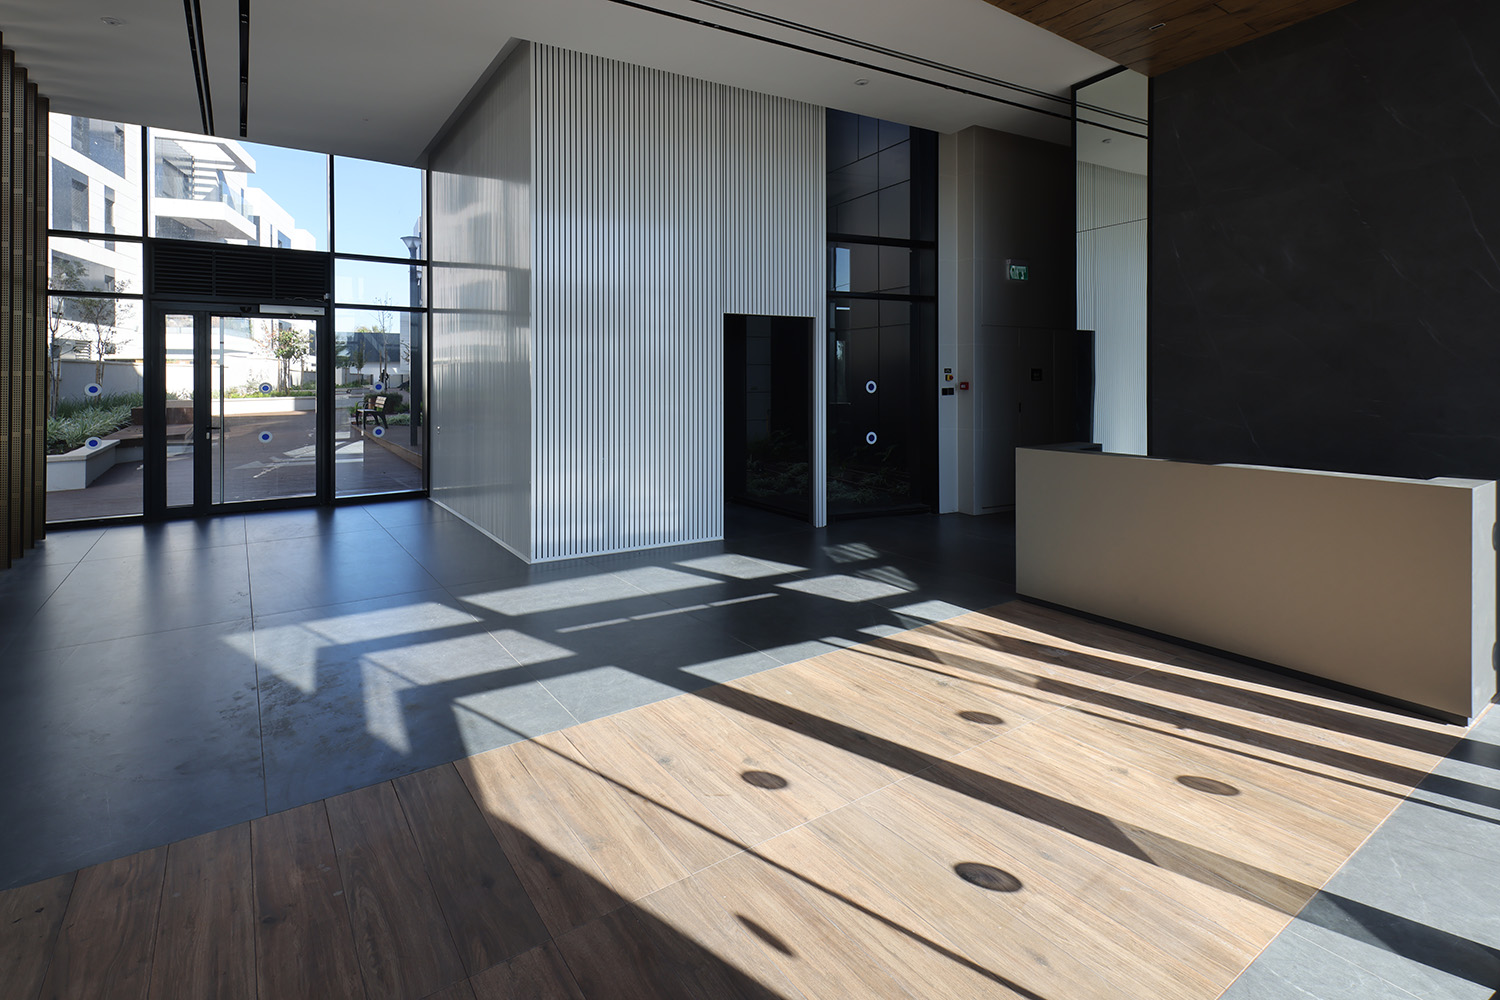 Photo of the lobby in the CLE project in Kesaria